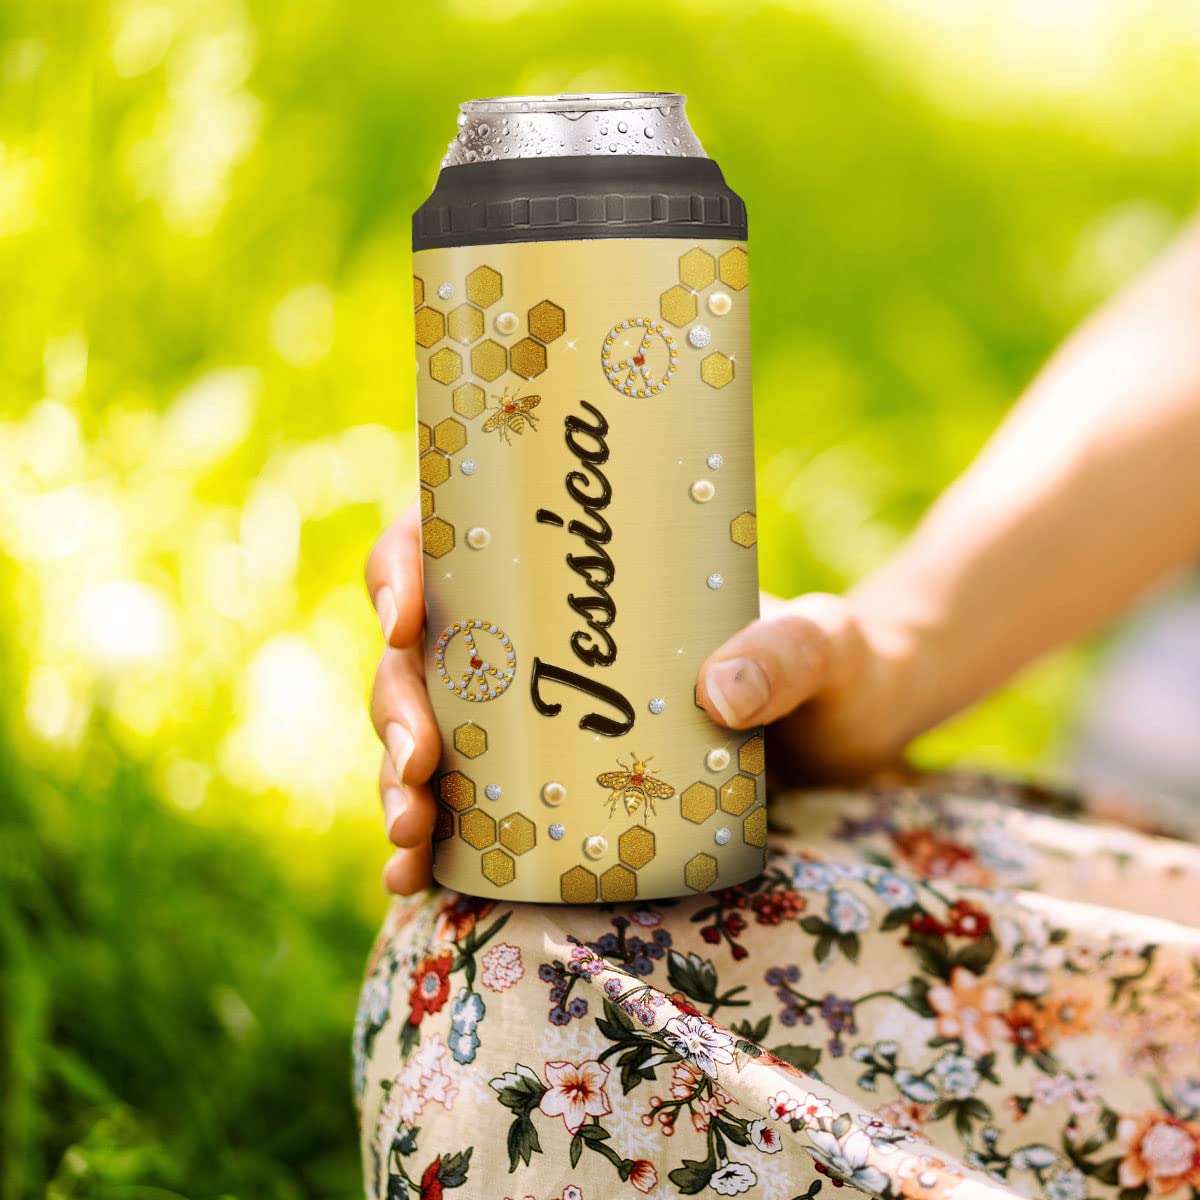 ZOXIX Personalized Can Cooler Let It Bee Gifts For Bee Lovers Women Jewelry Style Stainless Steel Tumbler Insulated Can Holder Travel Cup 16 Oz 4-in-1 Hippie Bee Themed Items